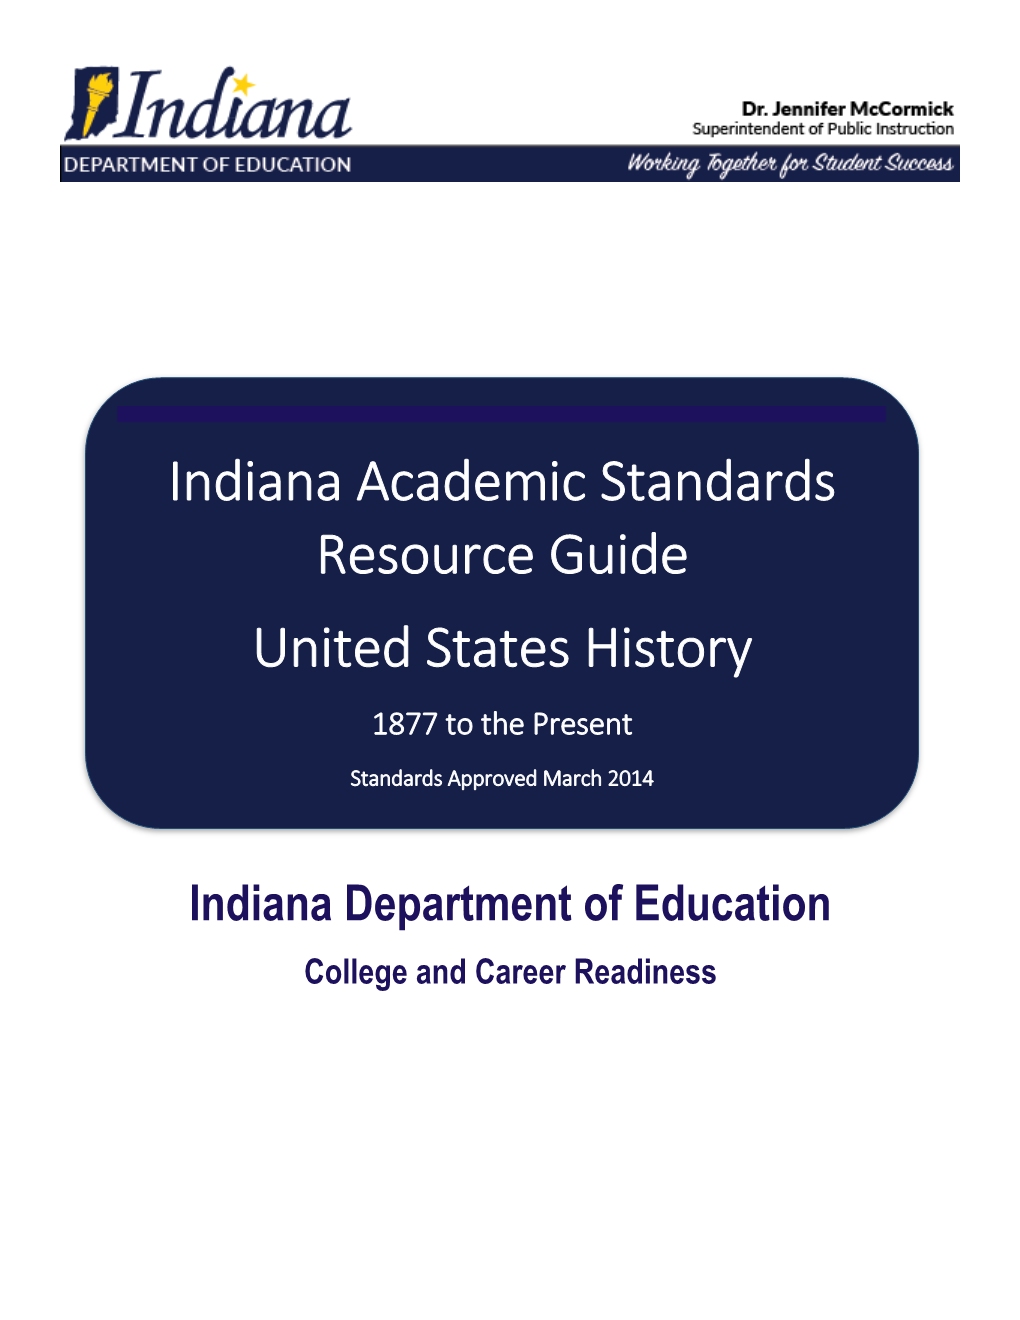 Indiana Department of Education College and Career Readiness